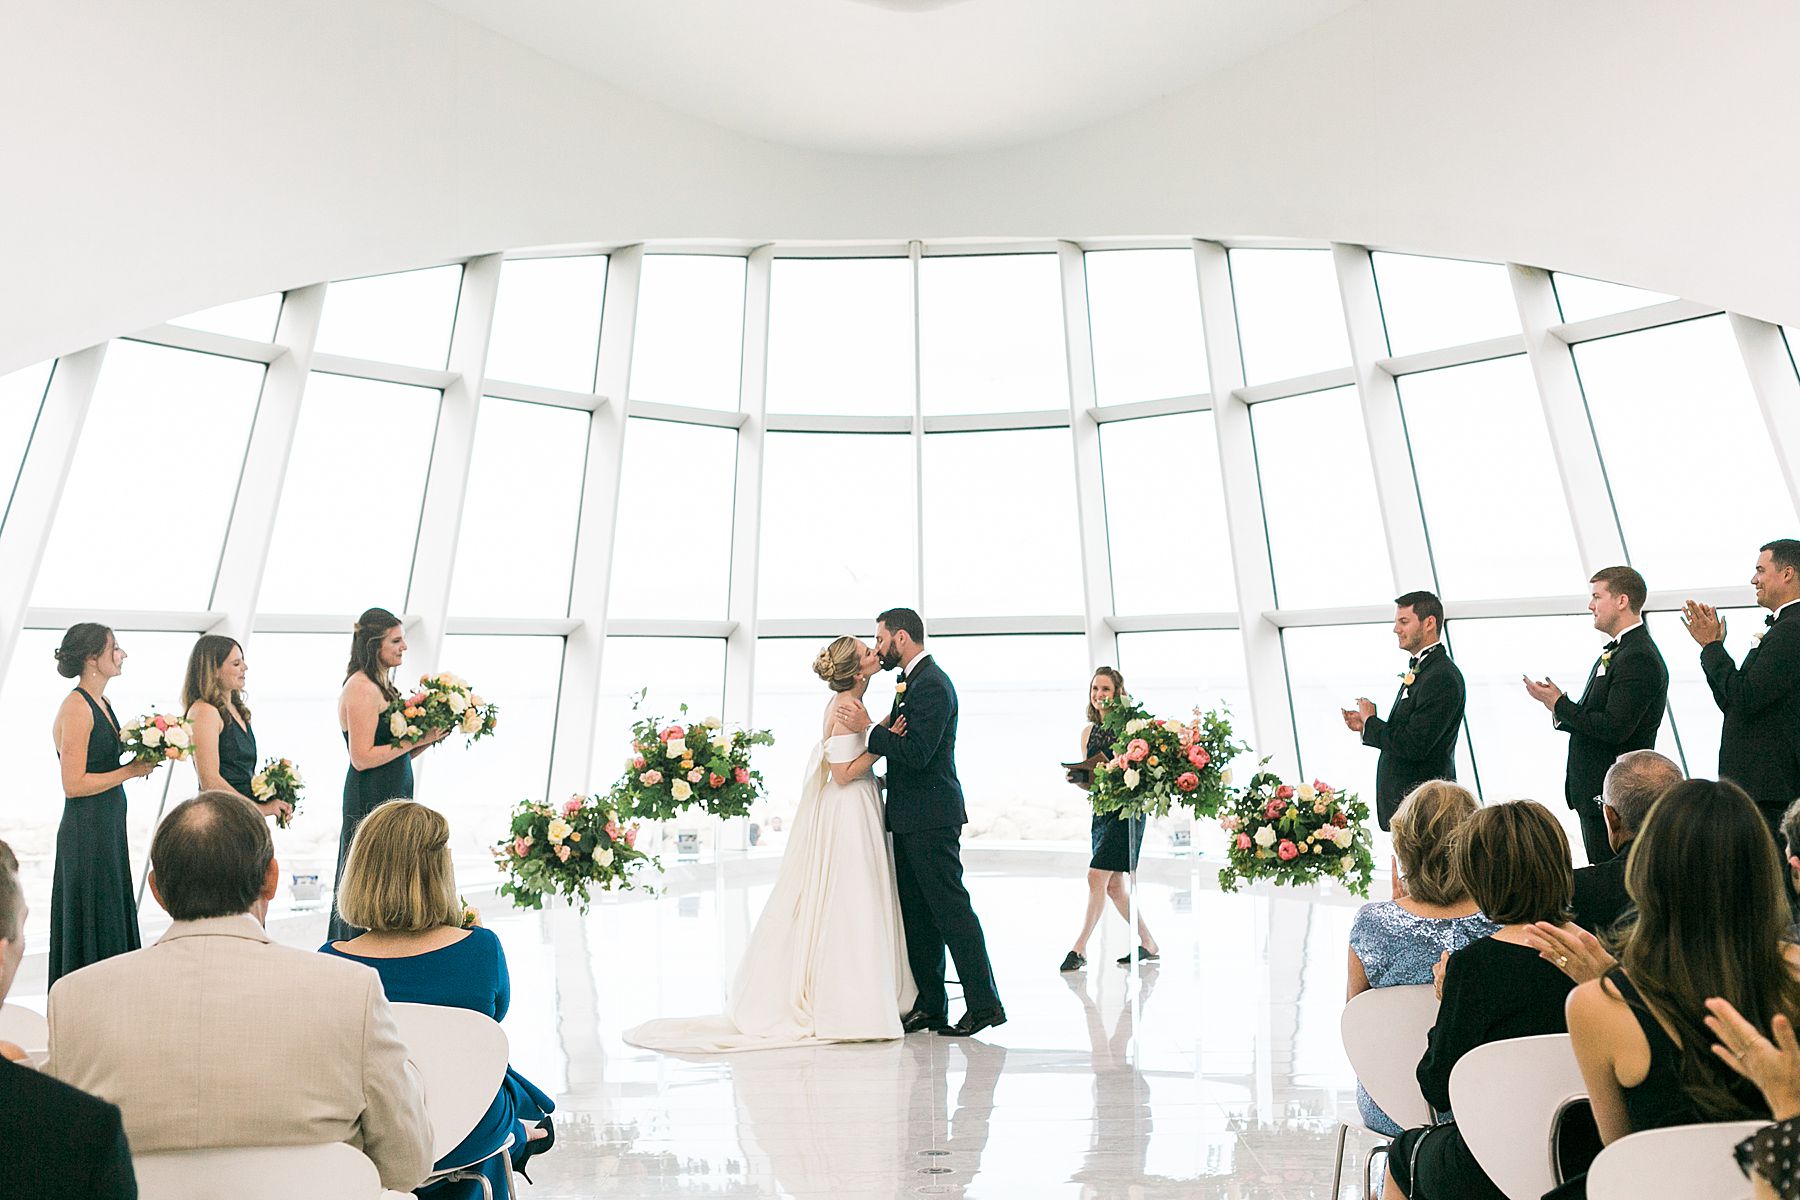 first kiss, modern minimal white and bright wedding ceremony at milwaukee art museum an architectural gem downtown with lake michigan view